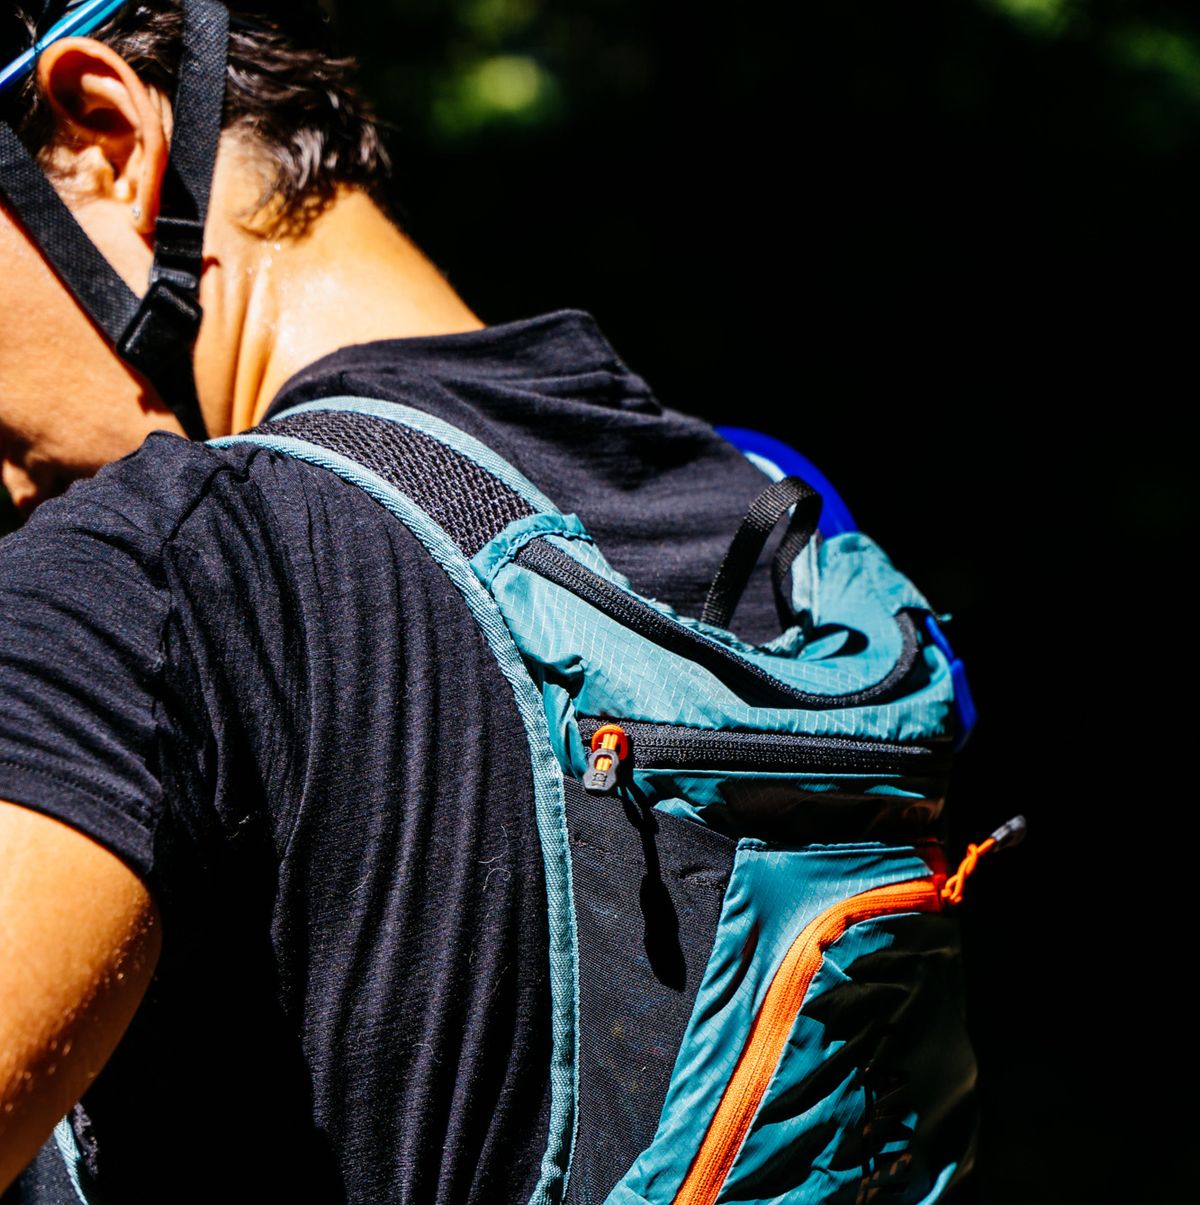 How To Clean A Camelbak: 3 Easy Steps To Cleaning Hydration Packs